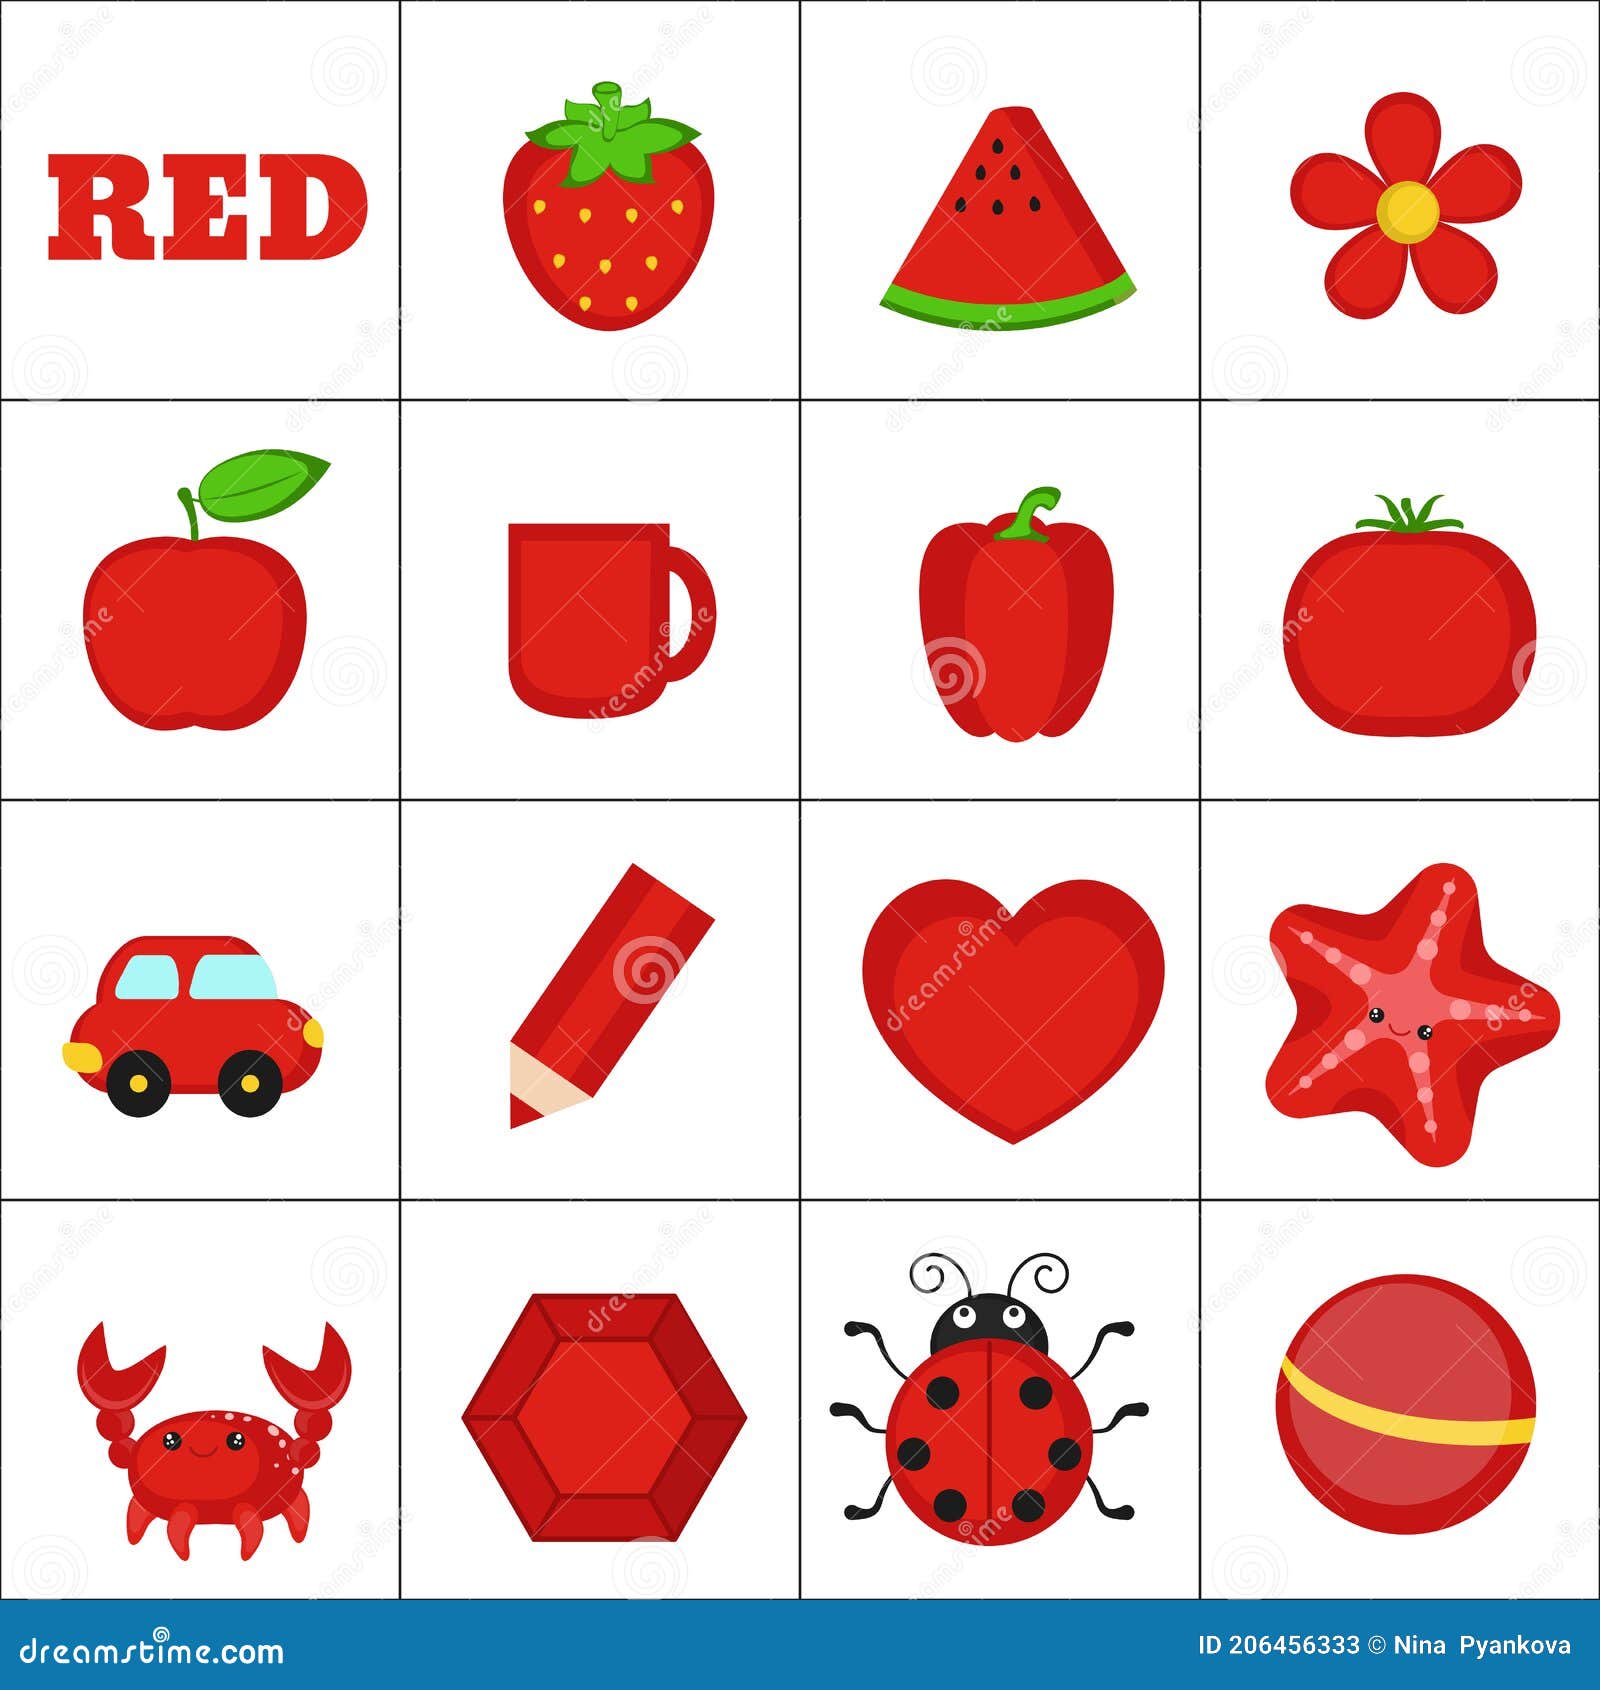 Best Ideas For Coloring Red Objects Worksheet